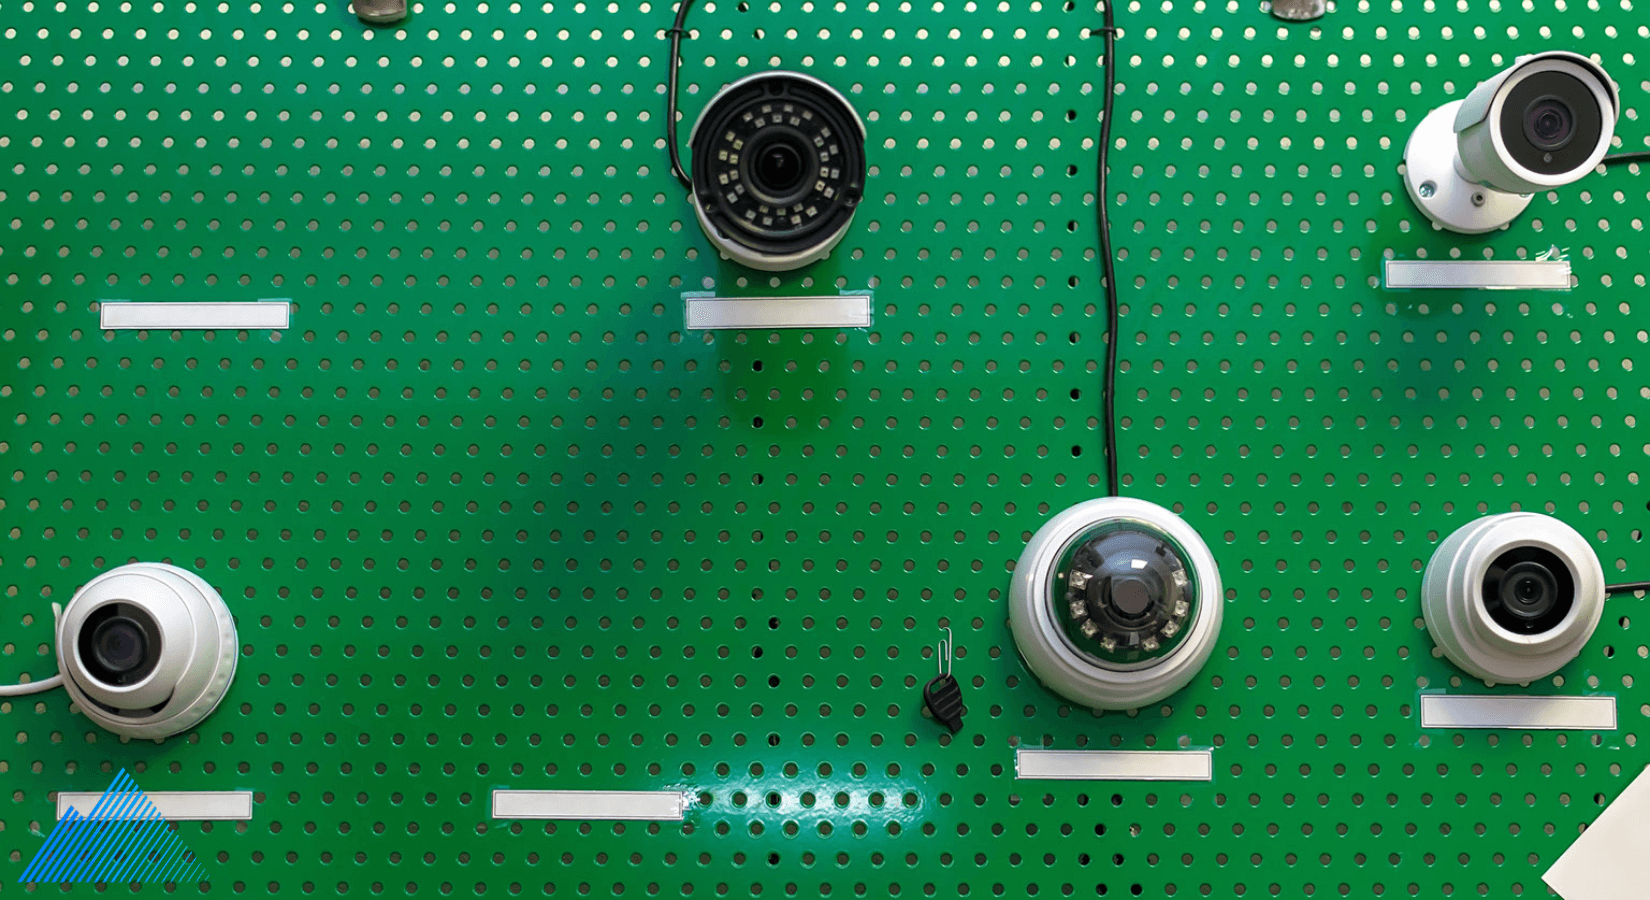 Different types of security cameras mounted to a peg board